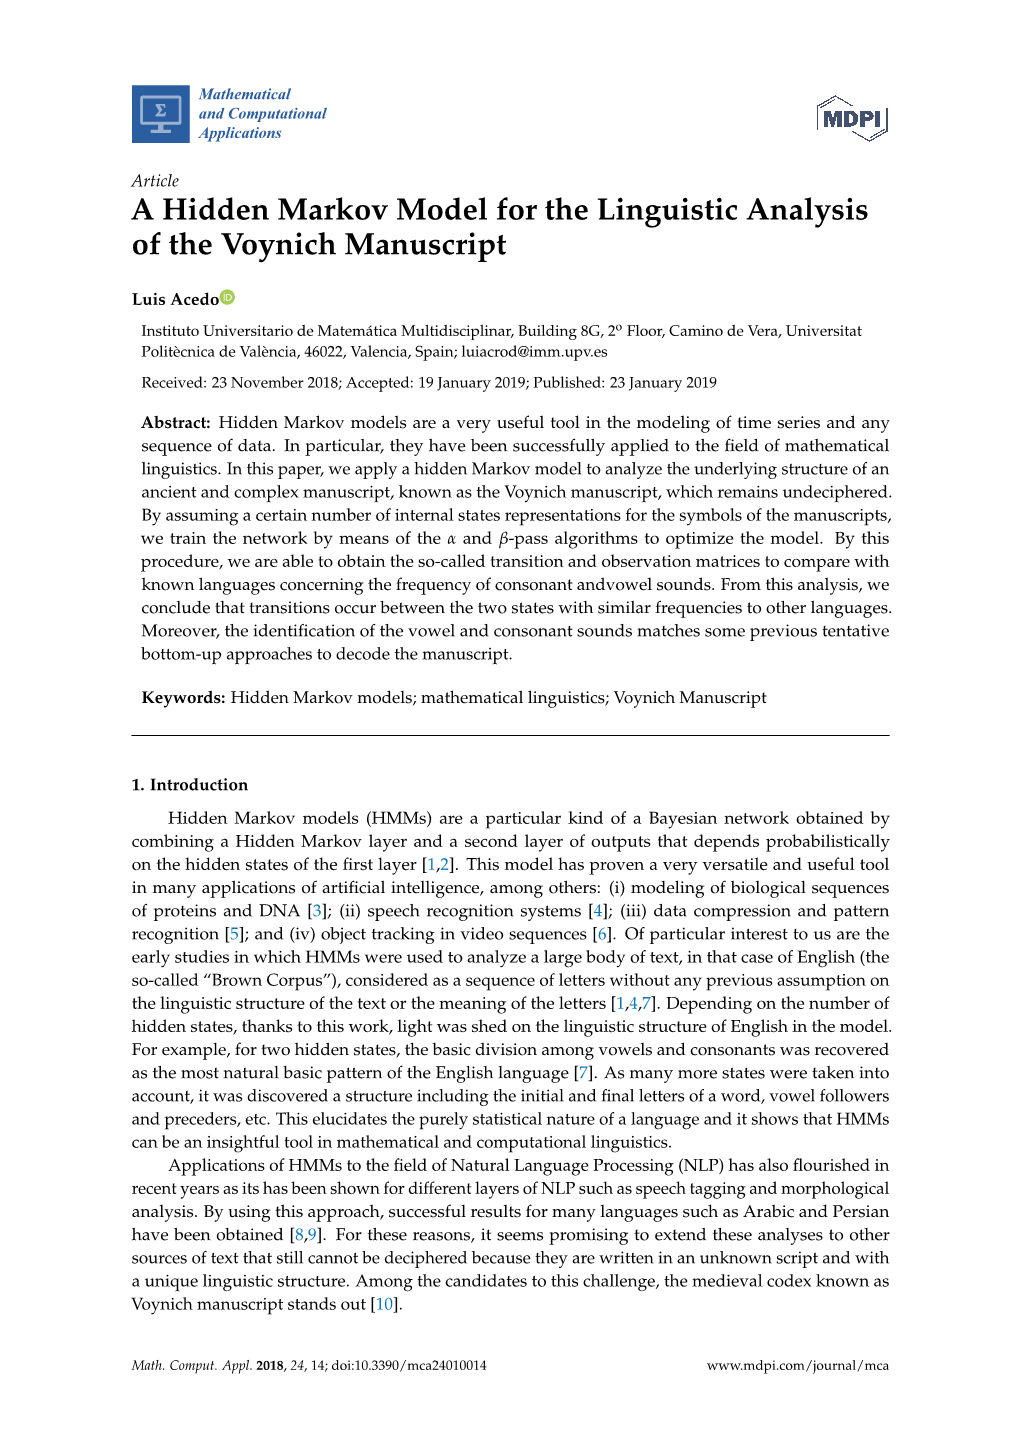 A Hidden Markov Model for the Linguistic Analysis of the Voynich Manuscript